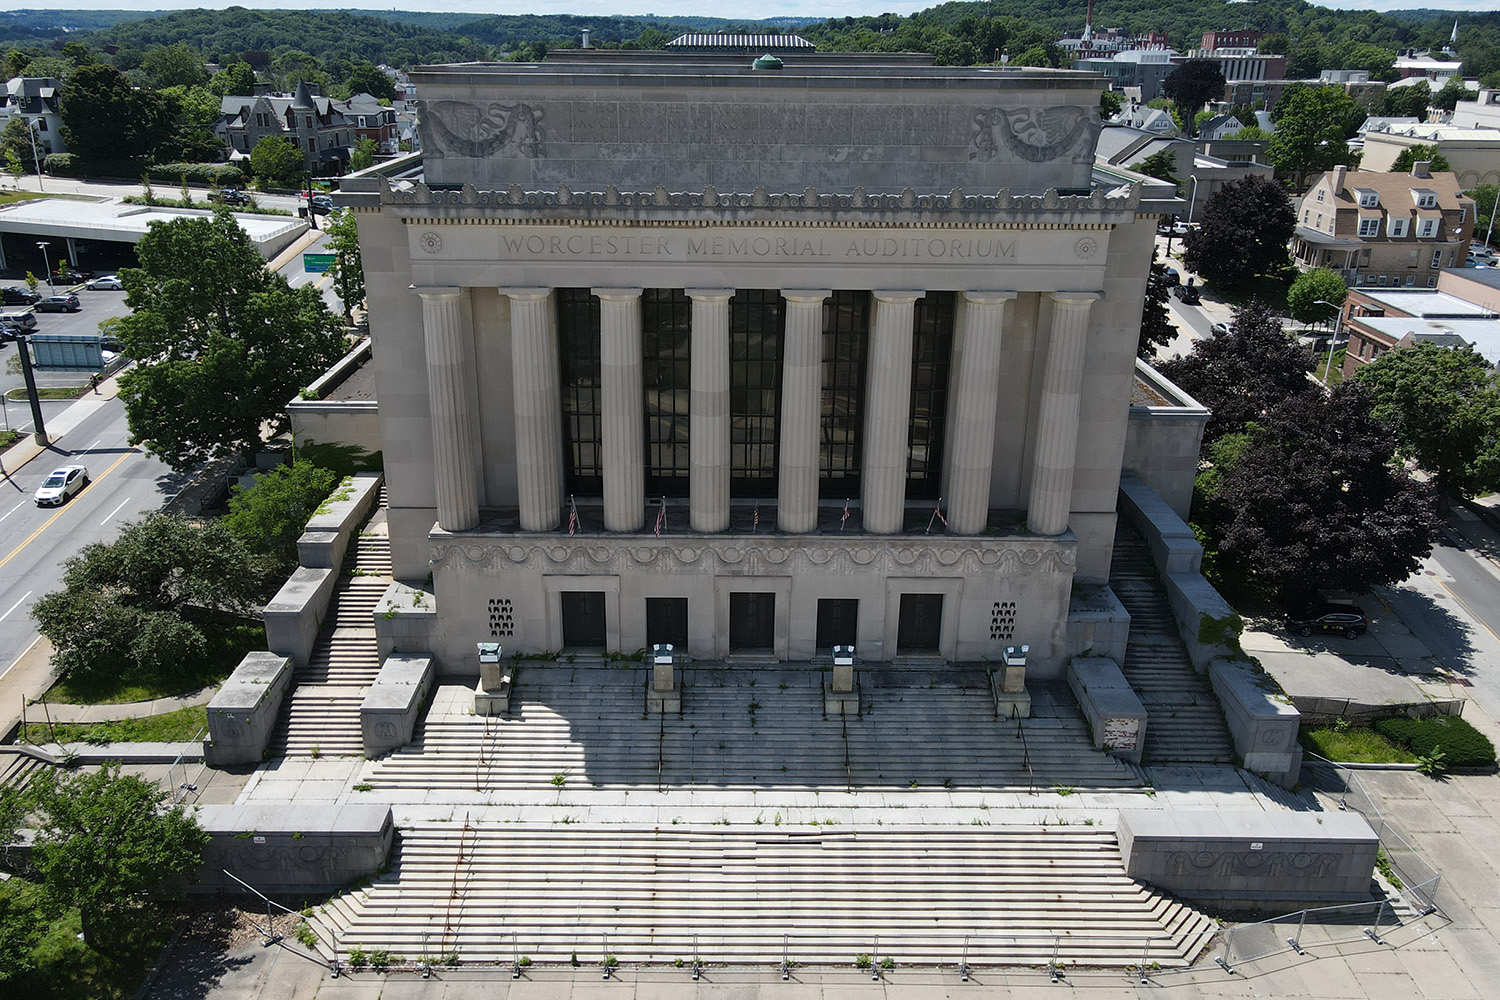 Front view of the once-grand Memorial Auditorium, with a grand staircase leading to the main doors